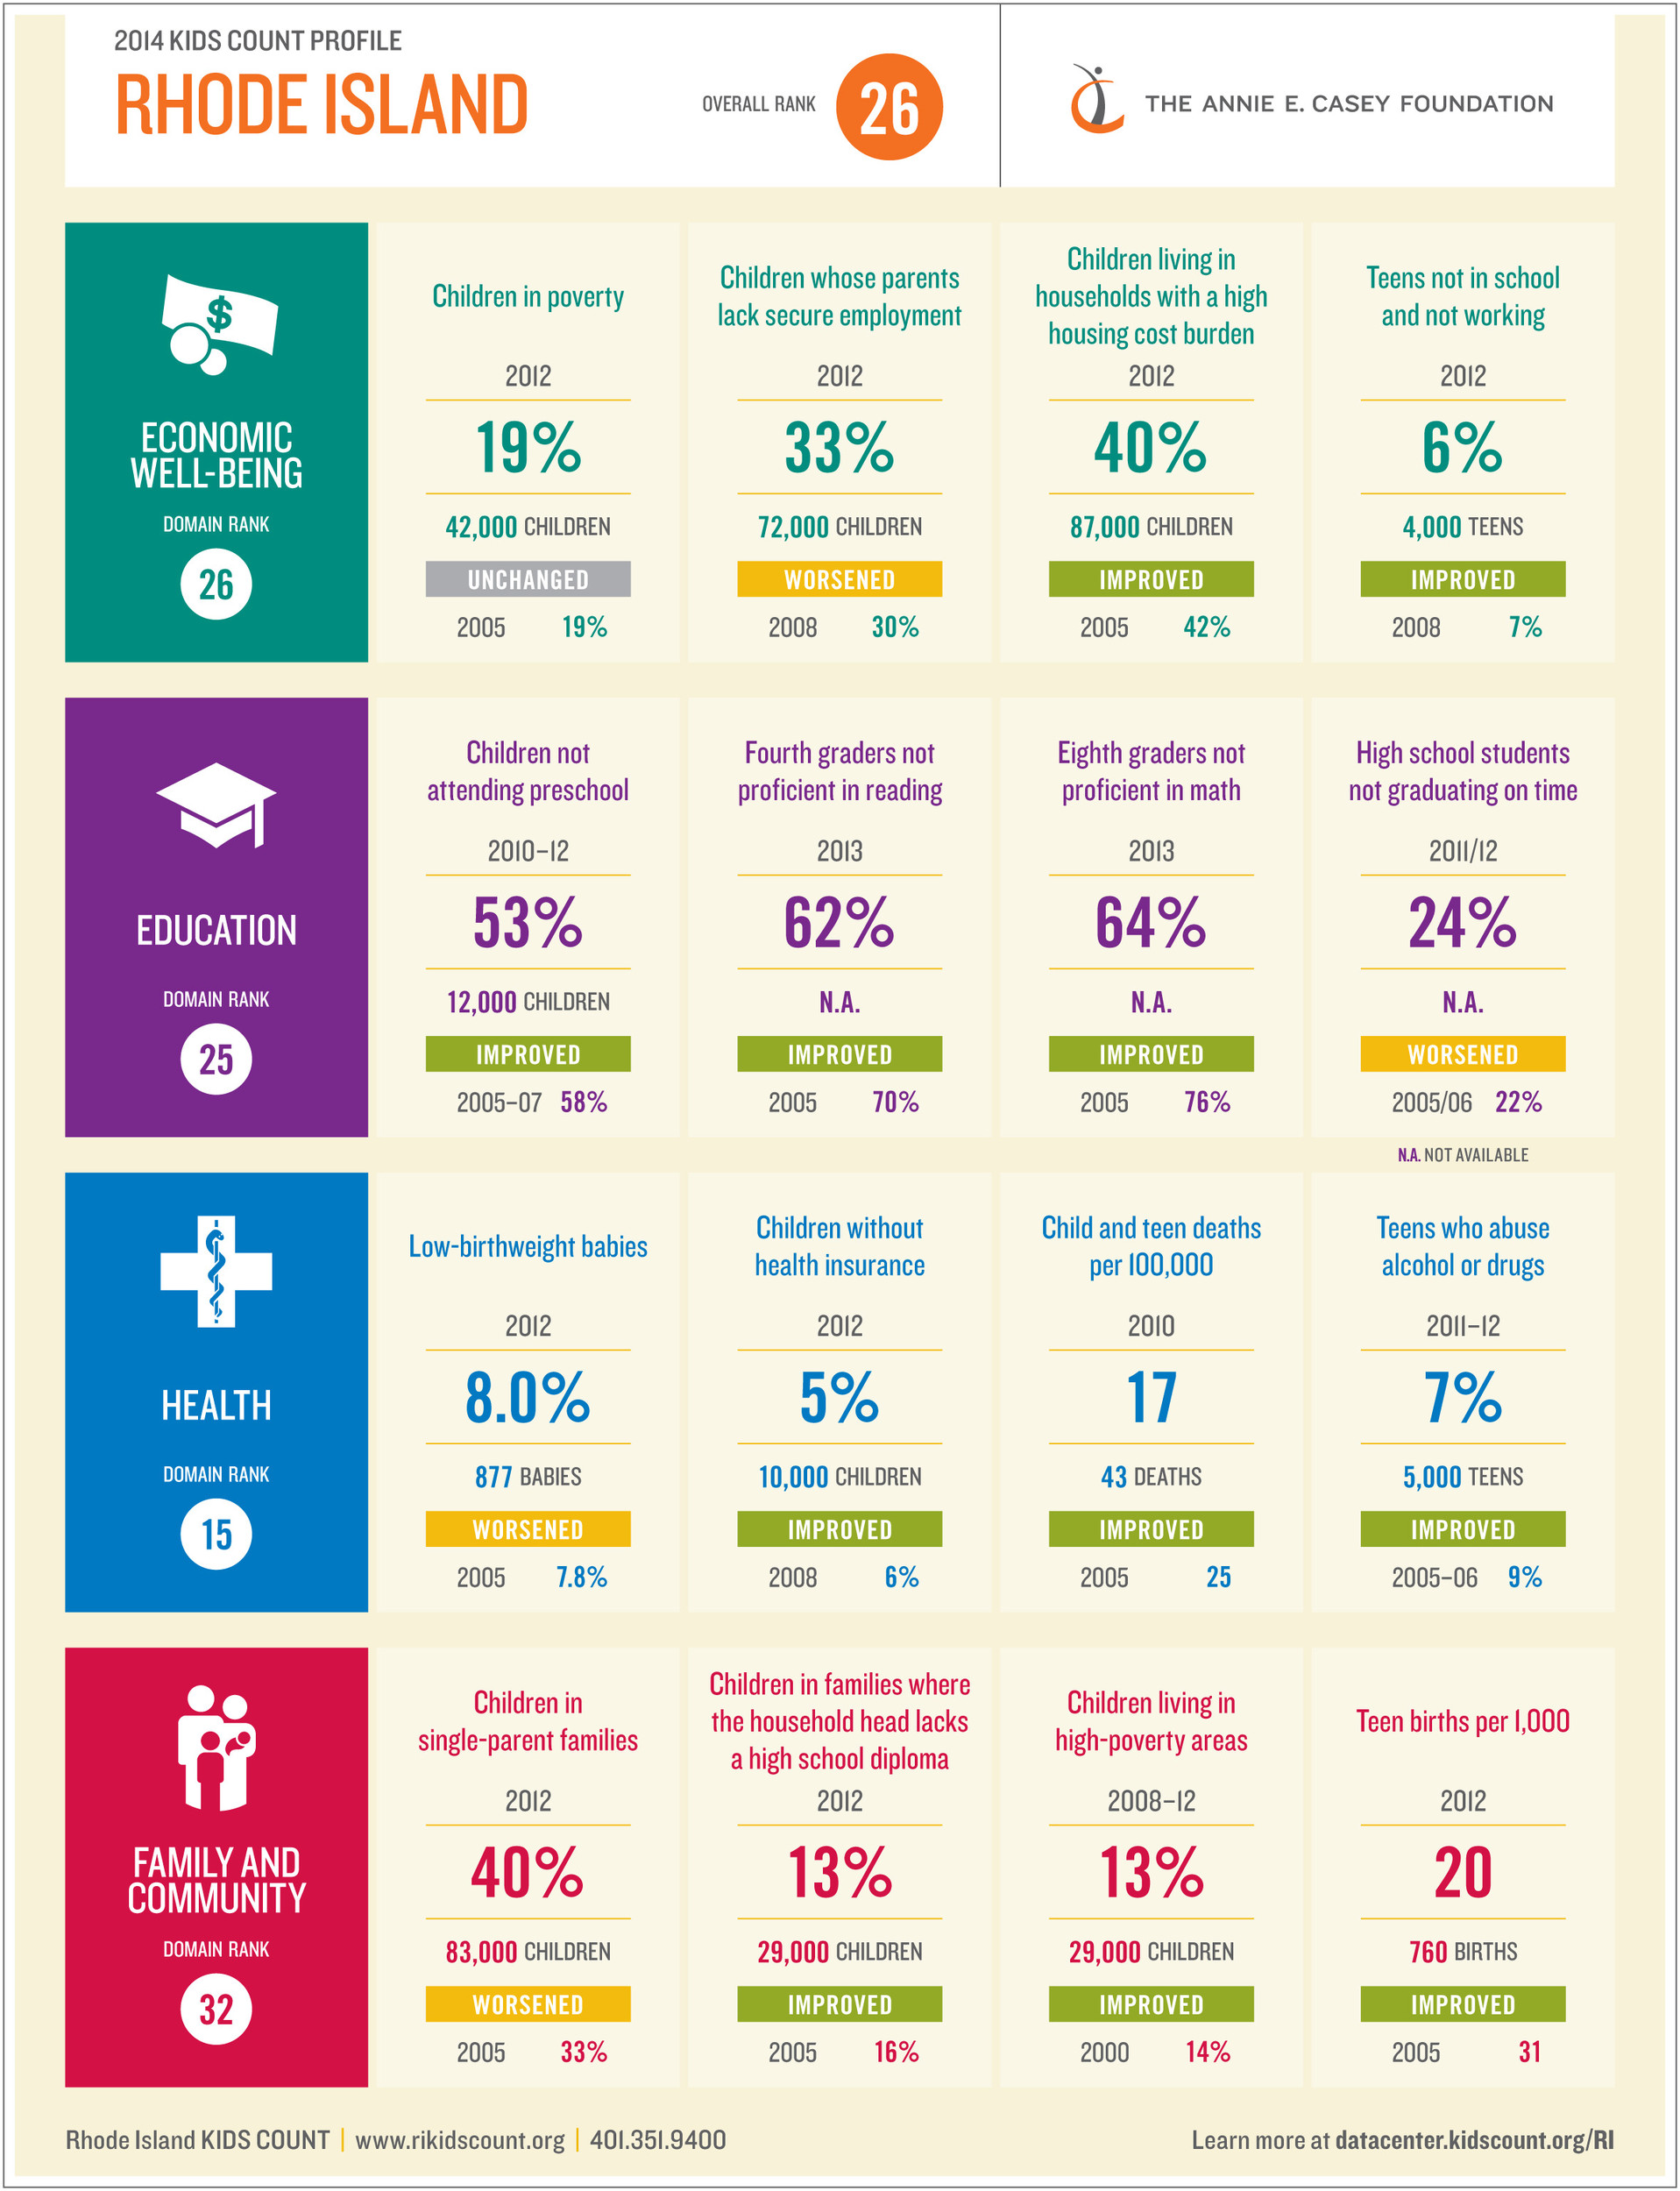 Rhode Island ranked 26th in the nation for the well-being of children and families. Above is the graphic showing the breakdown of its rankings in health, education, economic well-being and family and community.